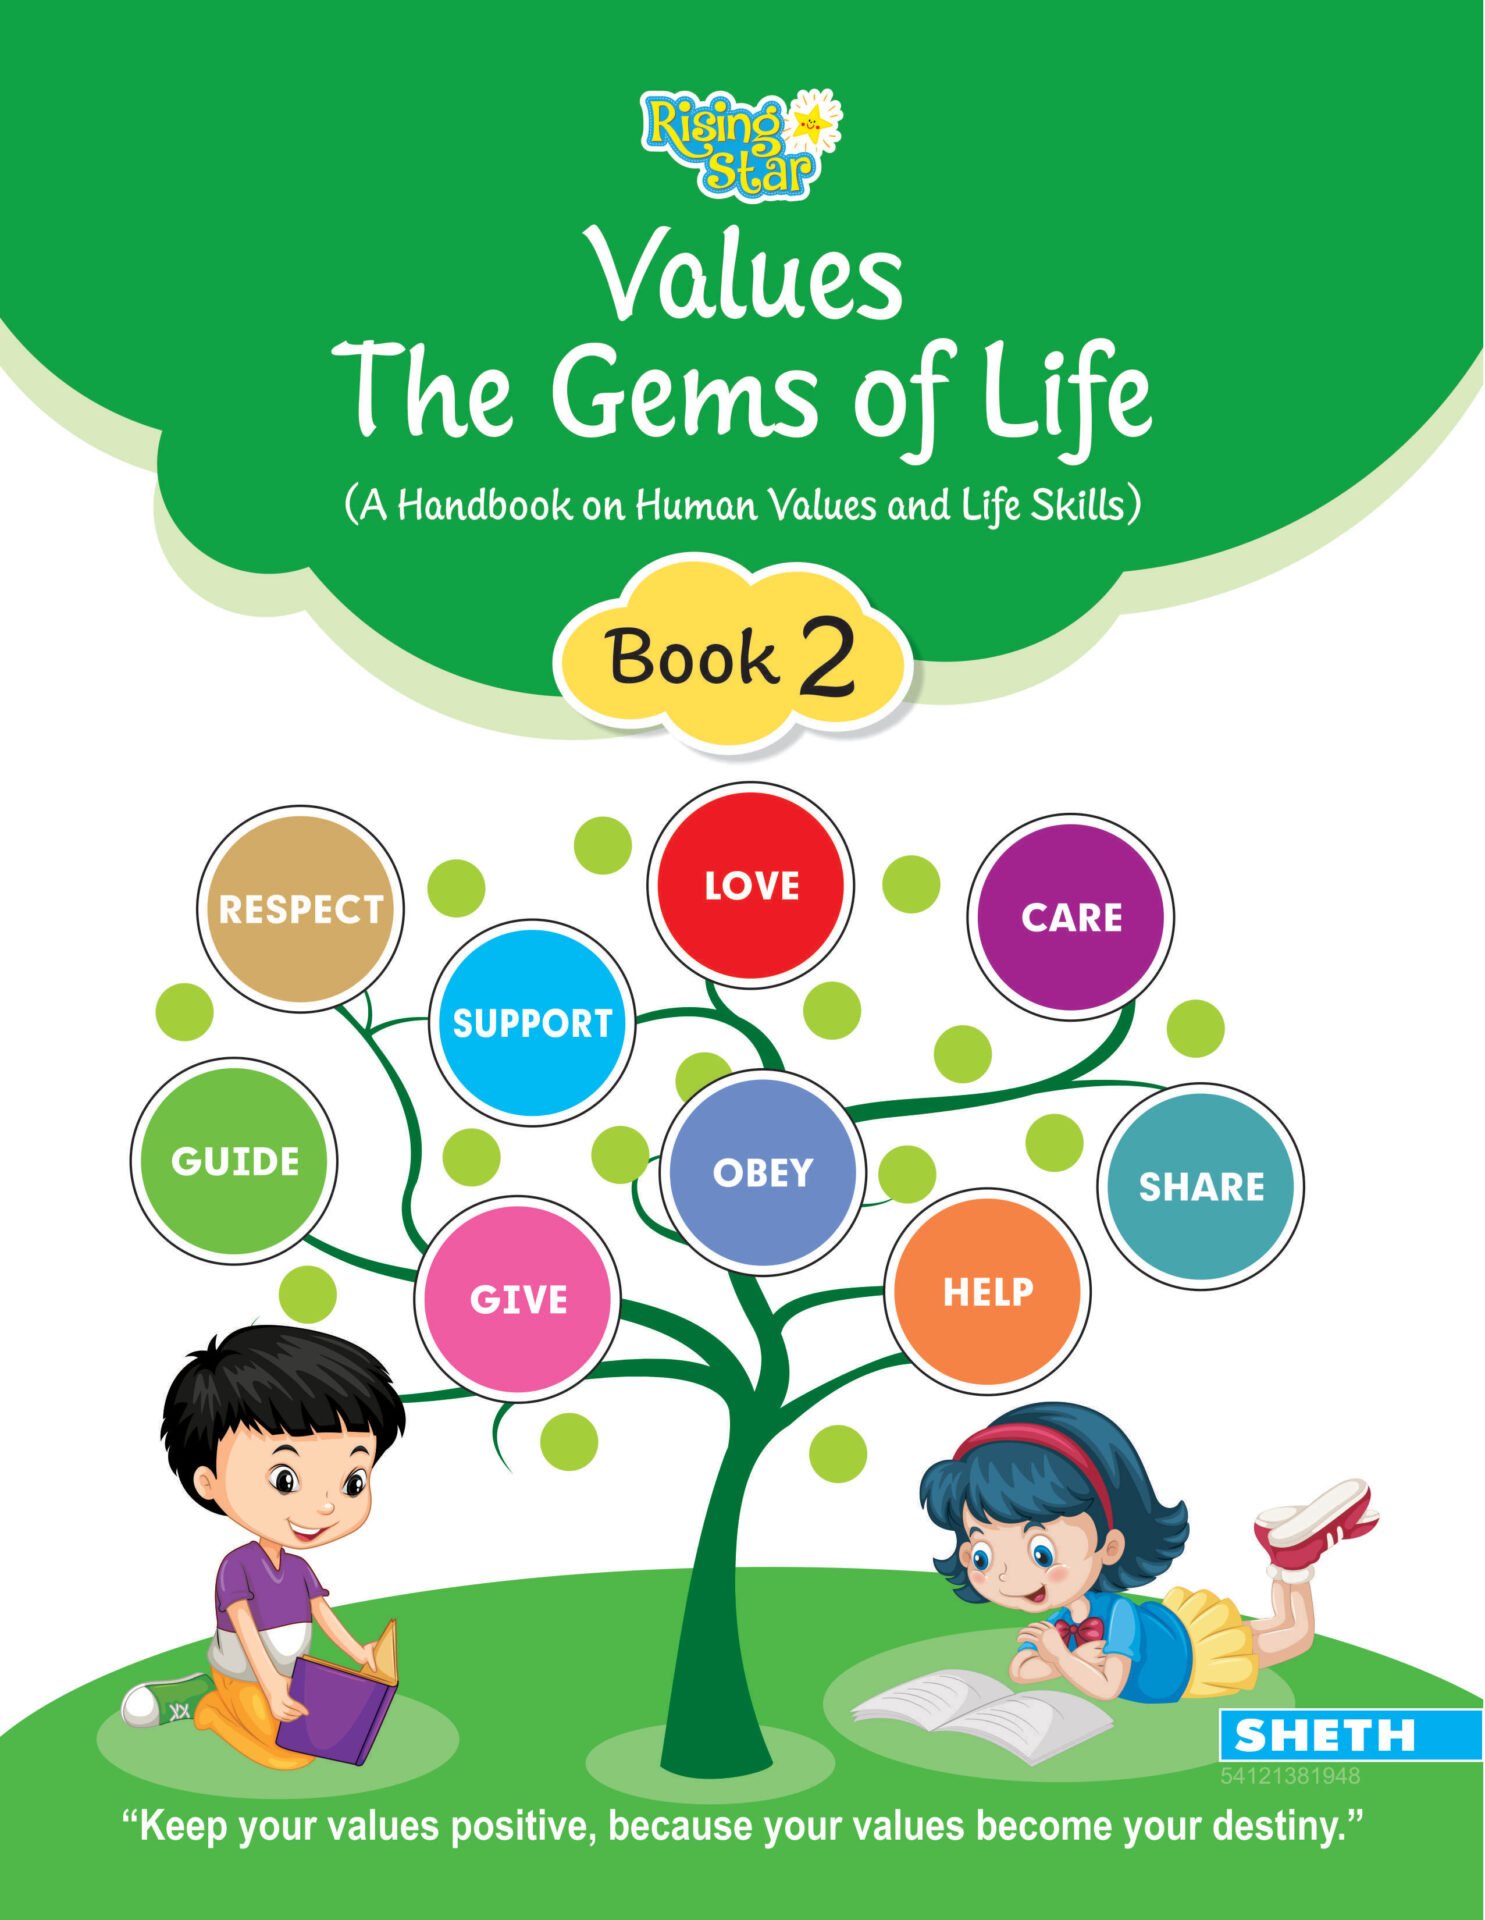 Rising Star Values The Gems of Life Book 2 1 1